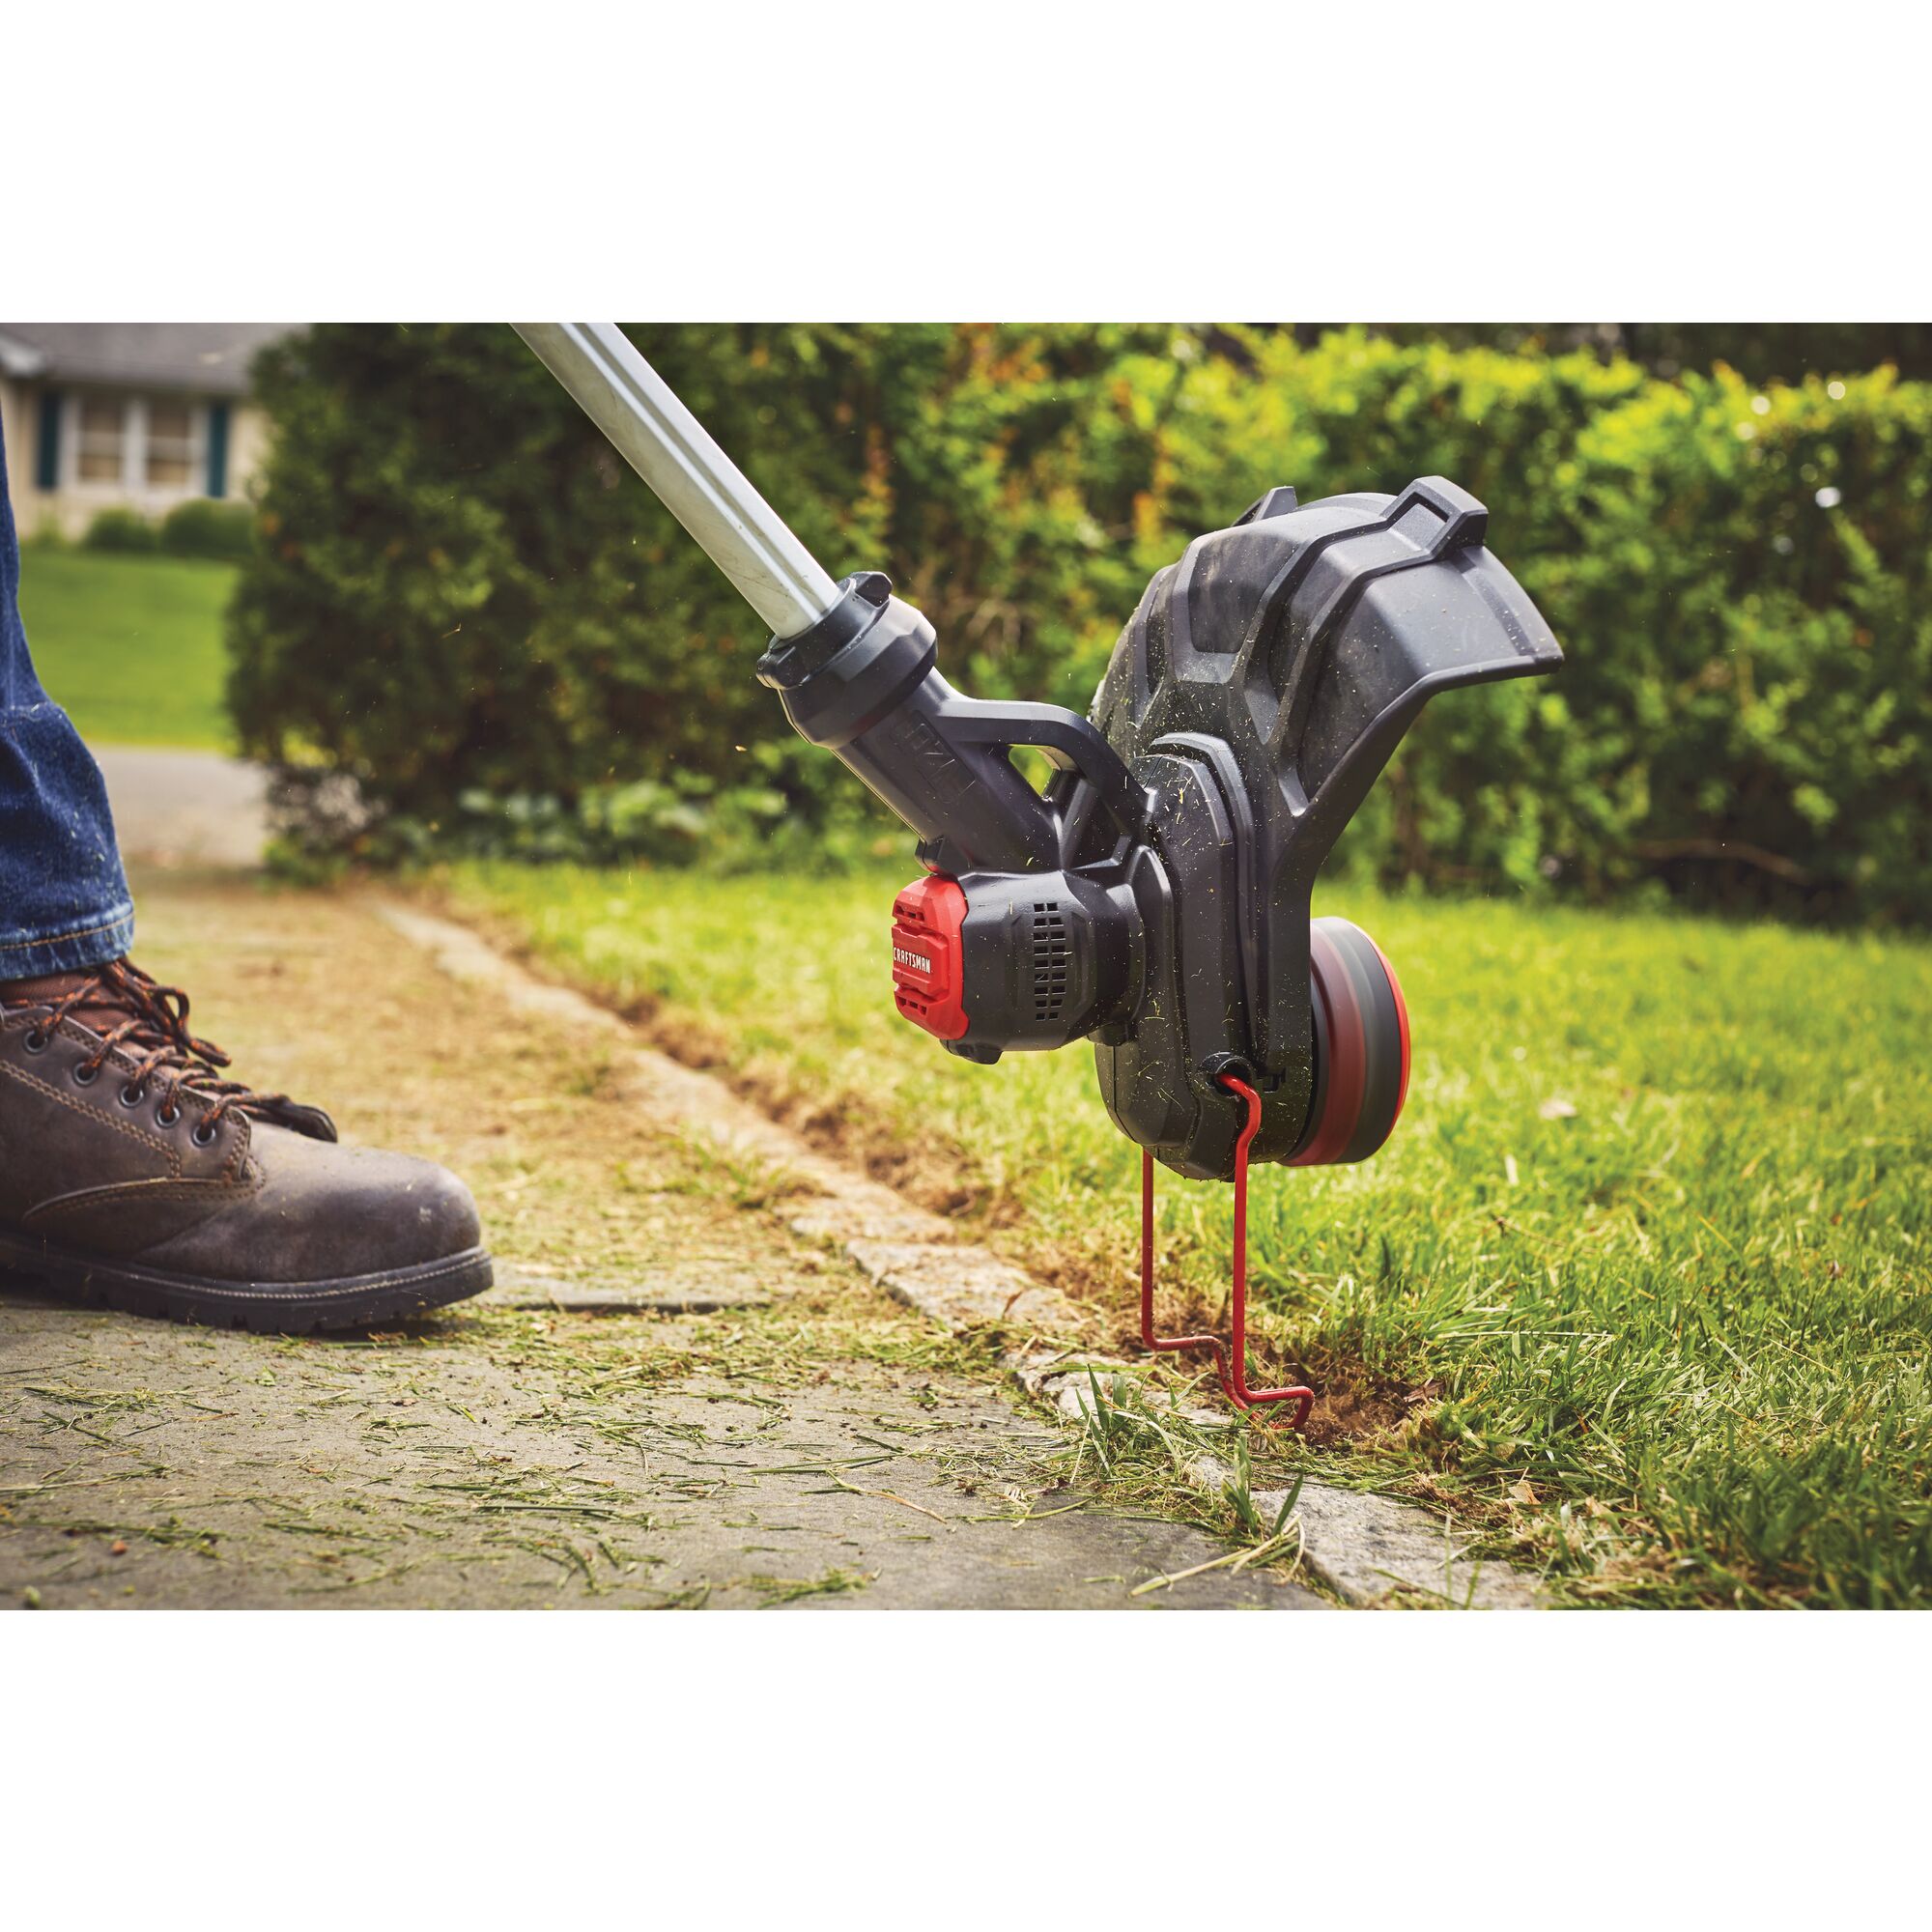 High efficiency motor feature of 20 volt weedwacker 13 inch cordless string trimmer and edger with automatic feed kit 2.0 ampere per hour.